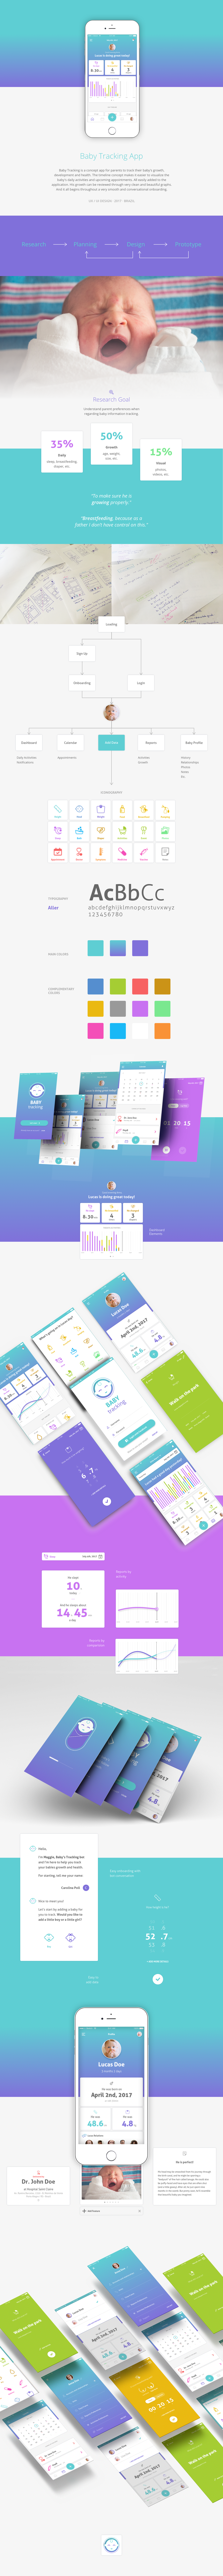 app baby tracking UI ux icons ios mobile user interface user experience